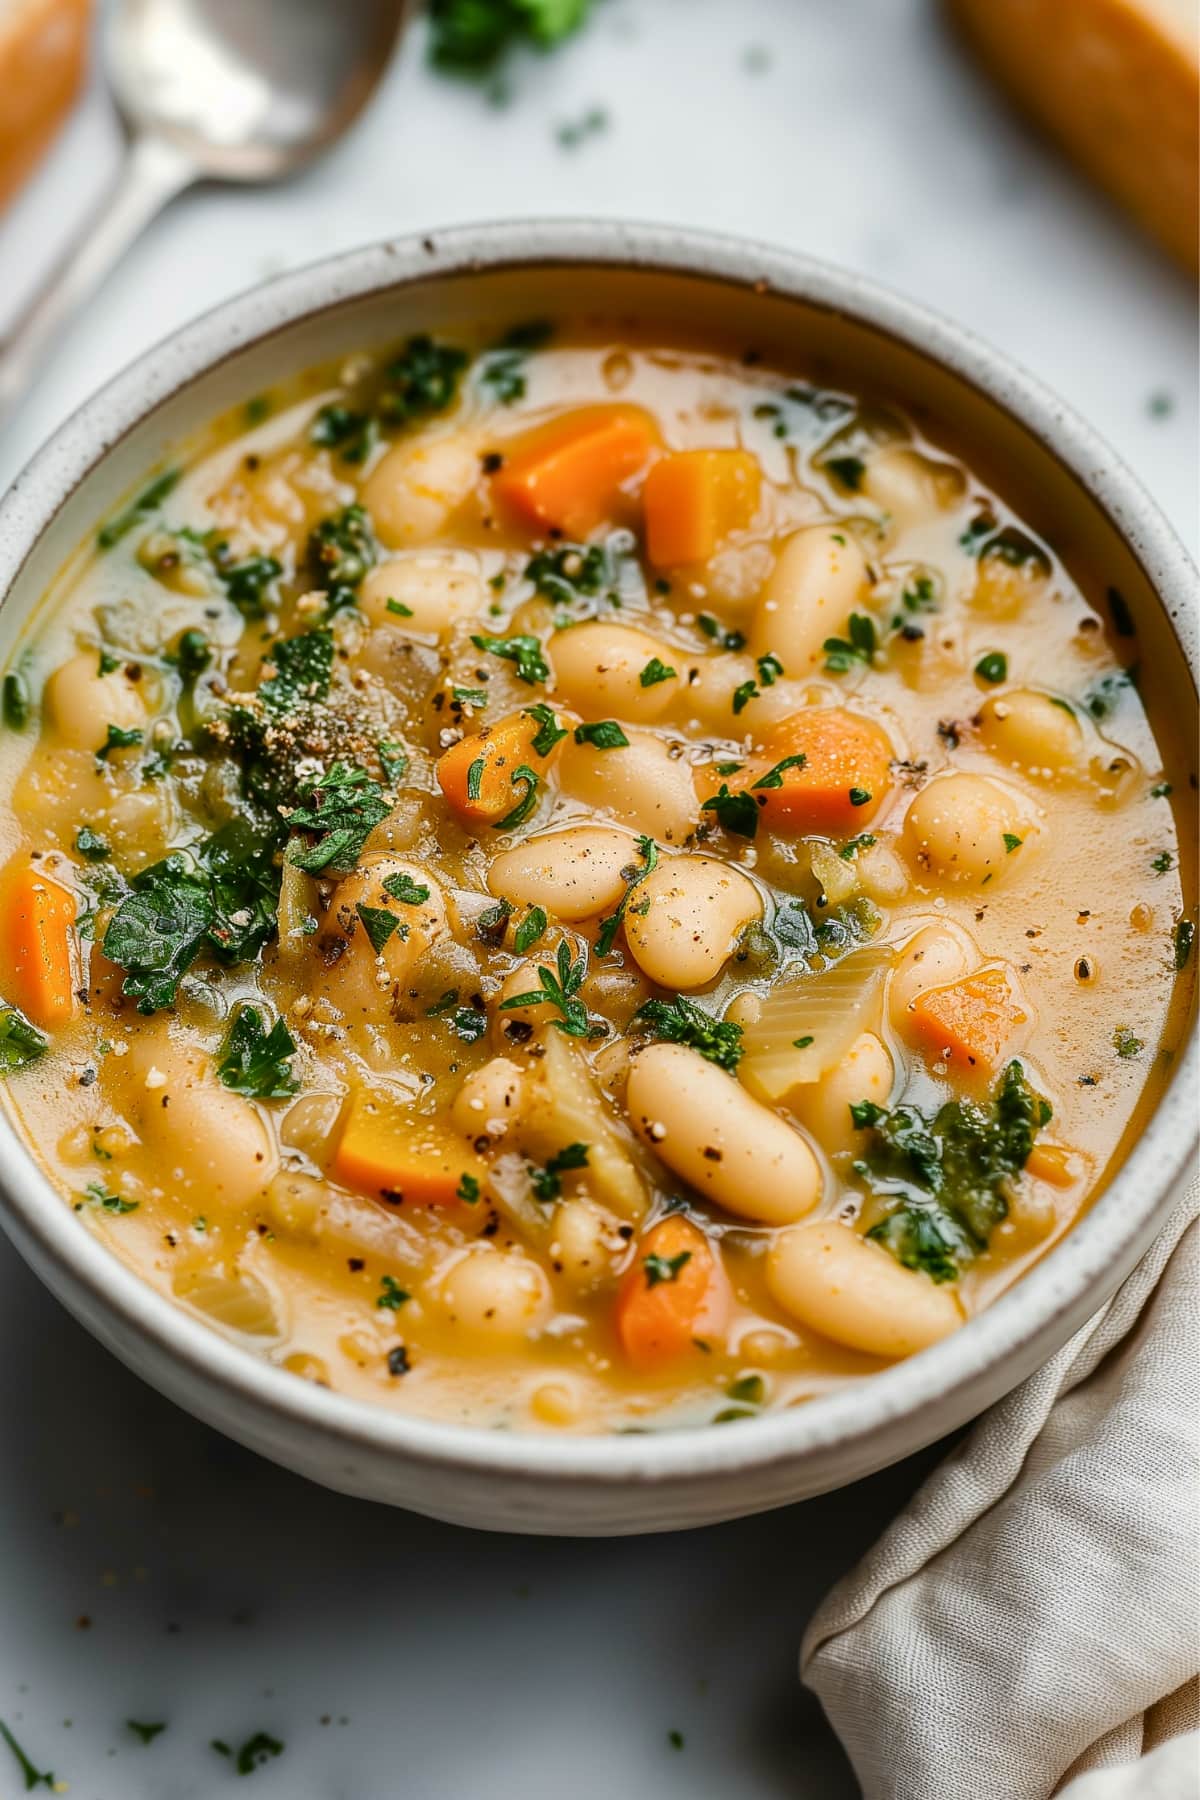 White bean soup with spinach and veggies in bowl.